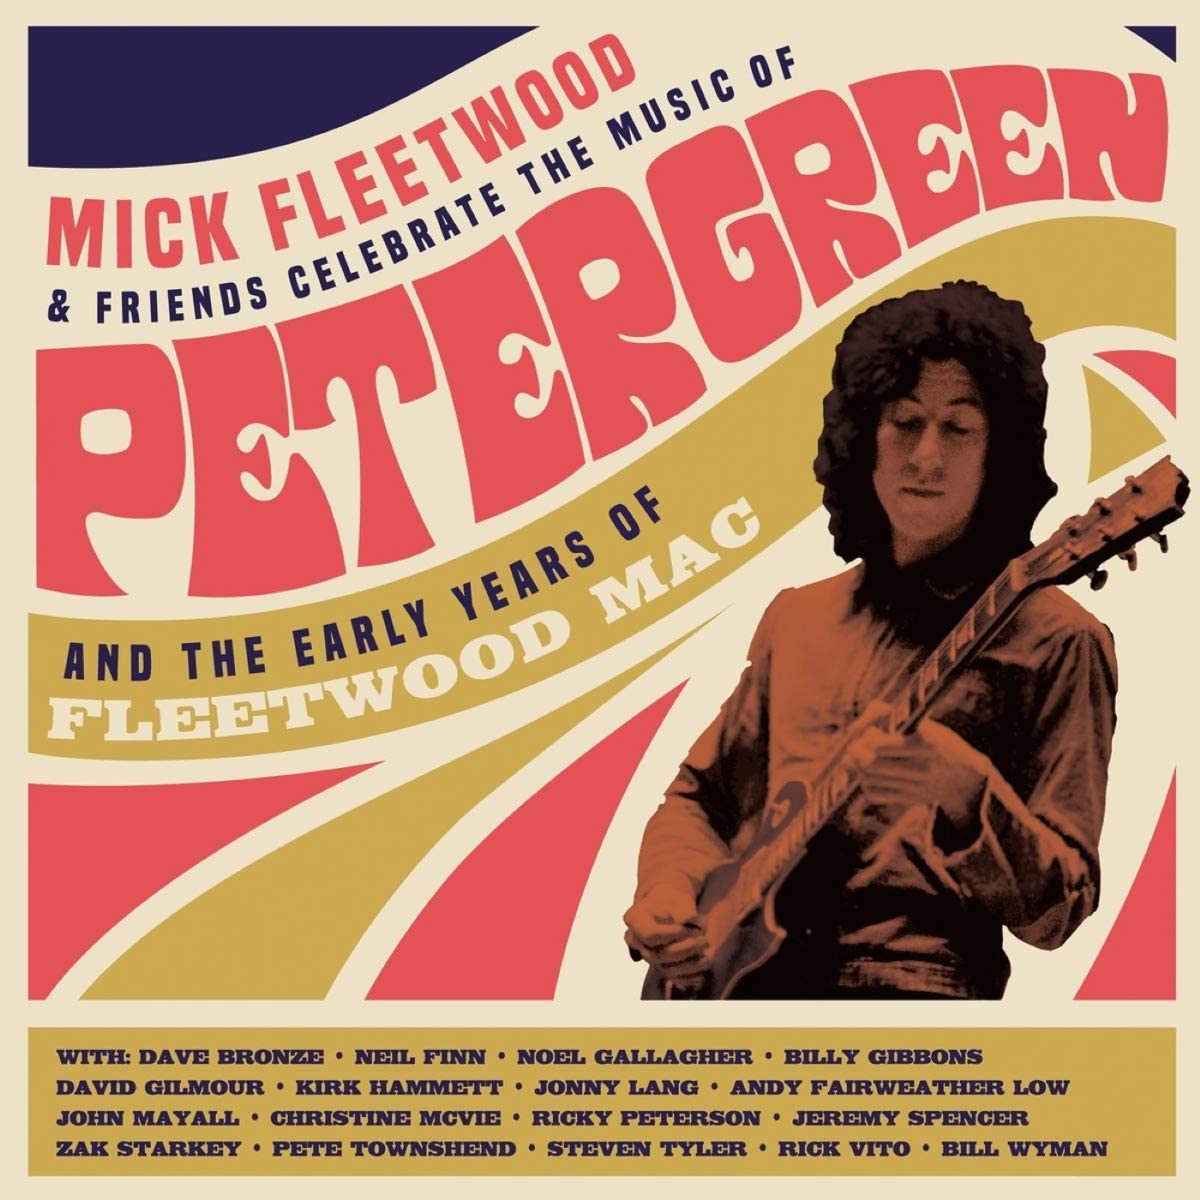 MICK FLEETWOOD & FRIENDS - Celebrate The Music of Peter Green and the Early Years of Fleetwood Mac - 2CD+BLU RAY - Mediabook